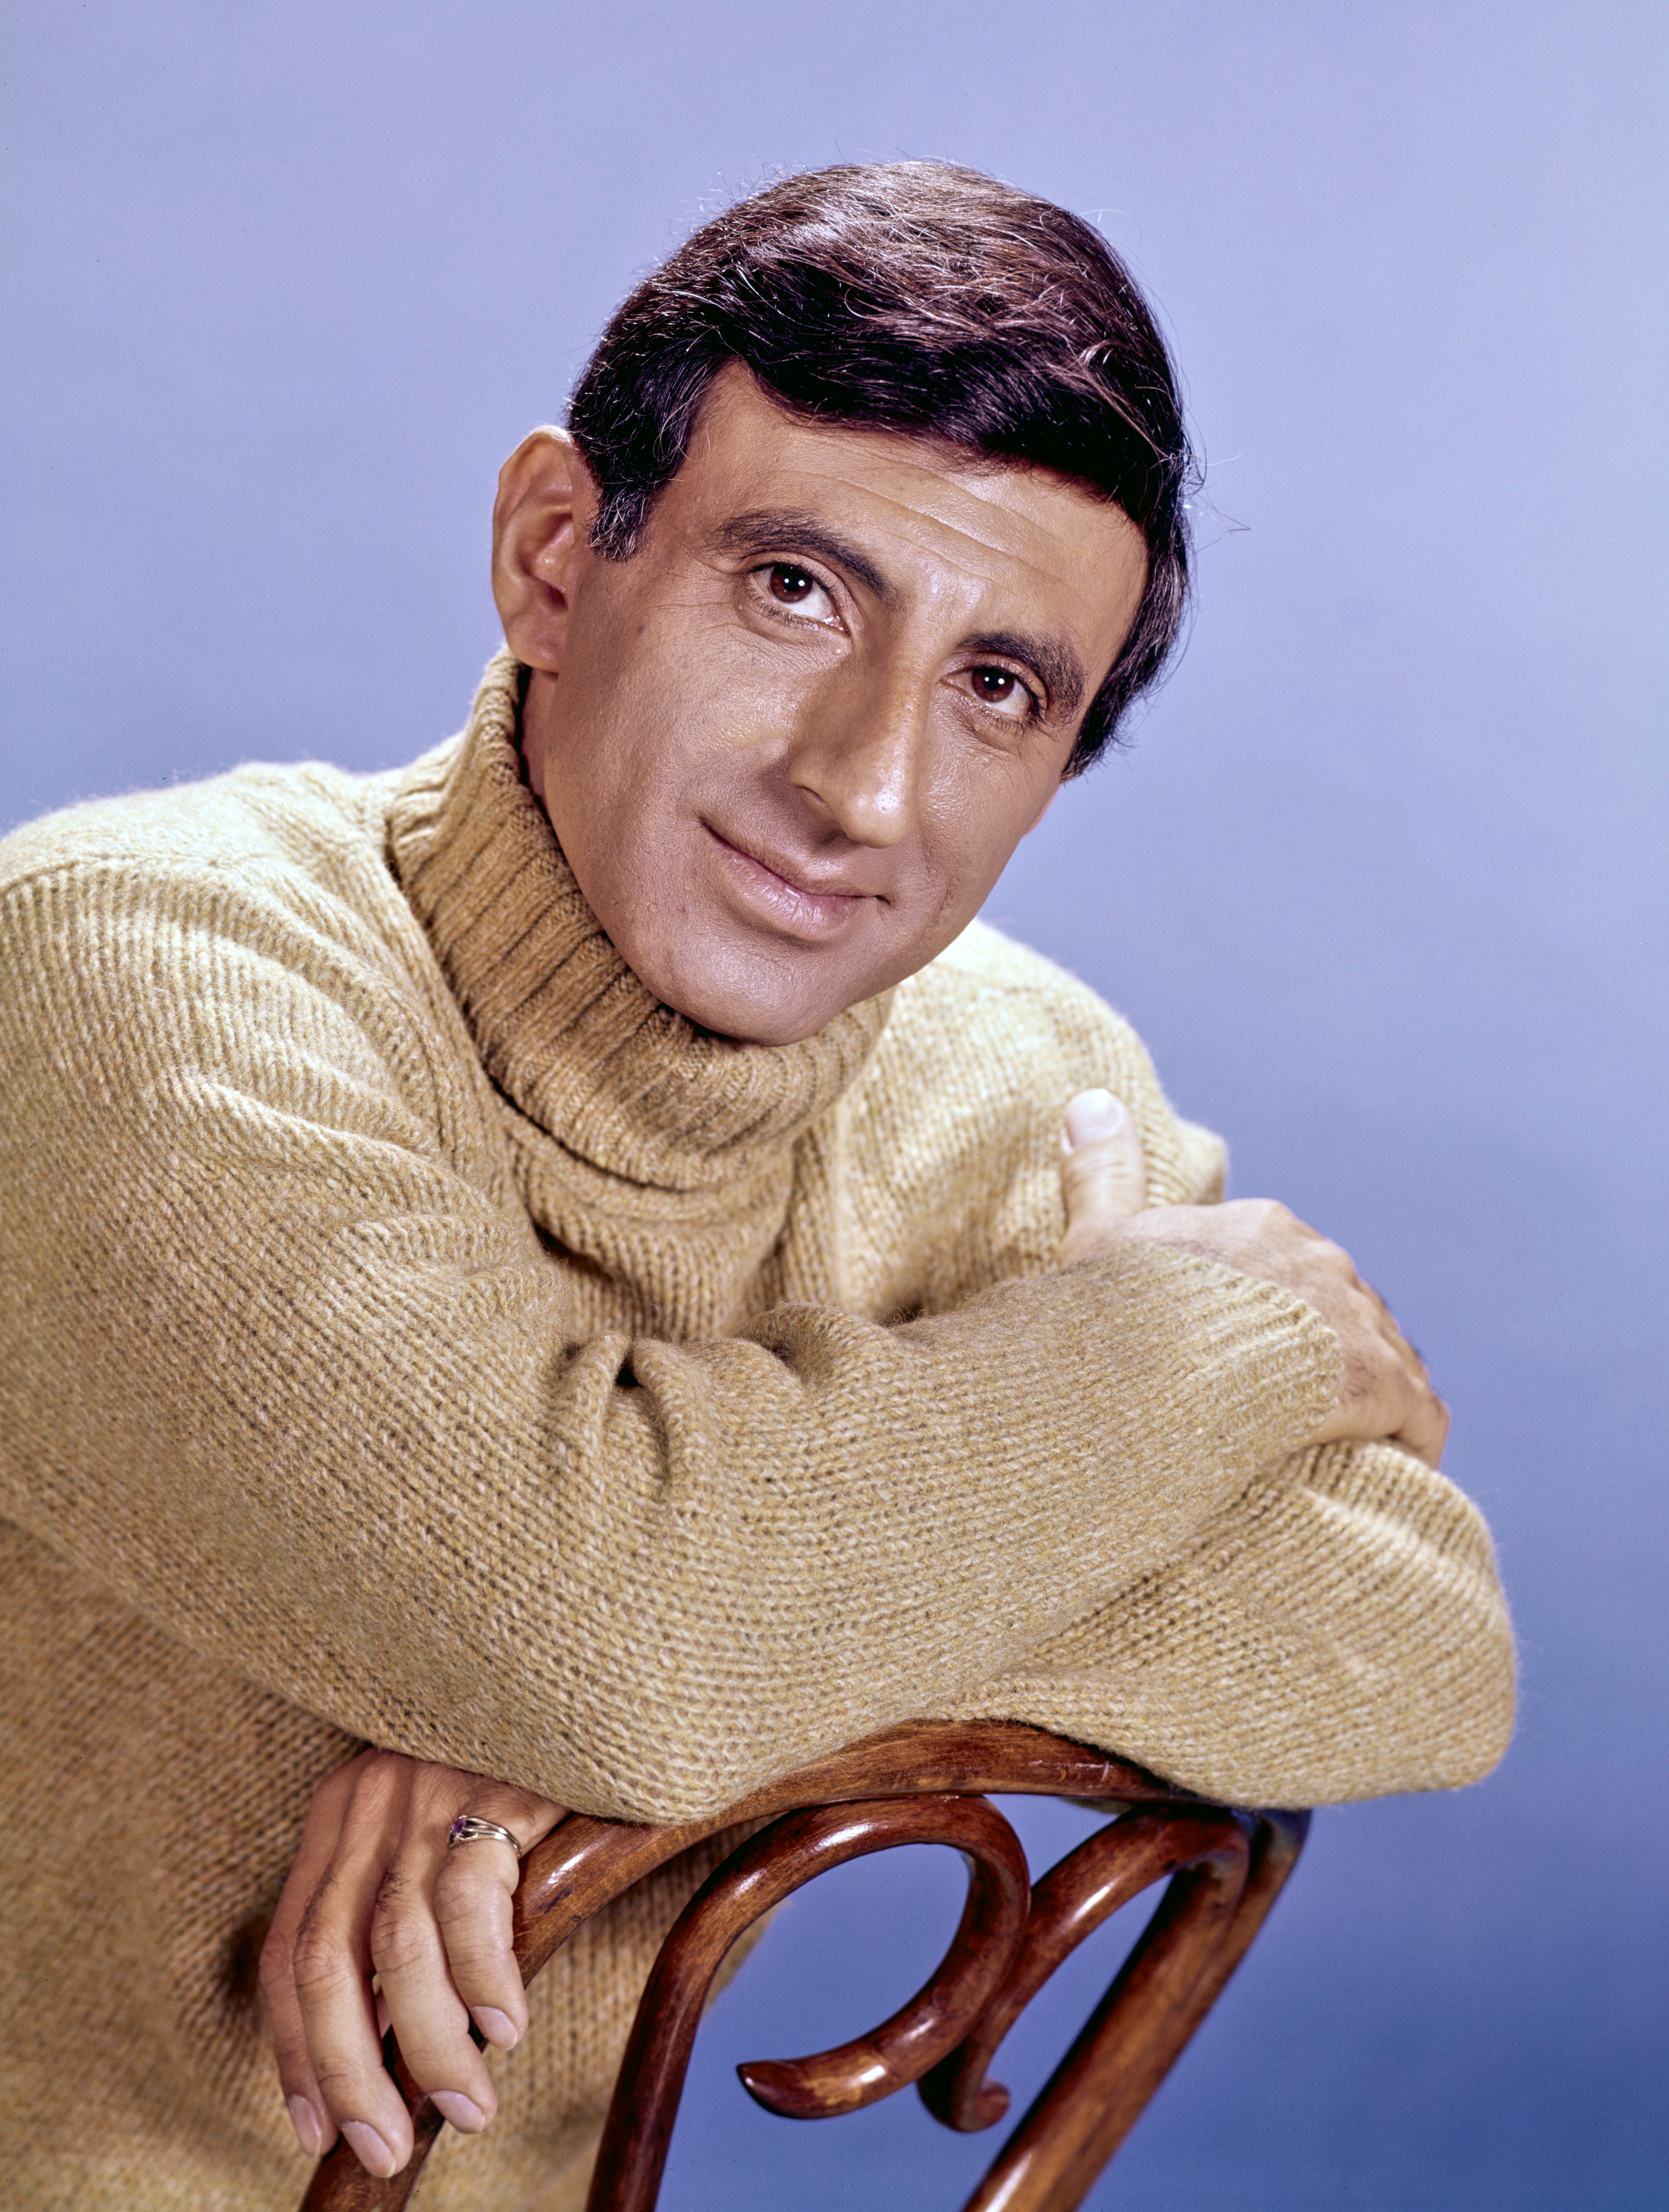 Jamie Farr in "The Chicago Bears," September 17, 1971. | Source: Getty Images